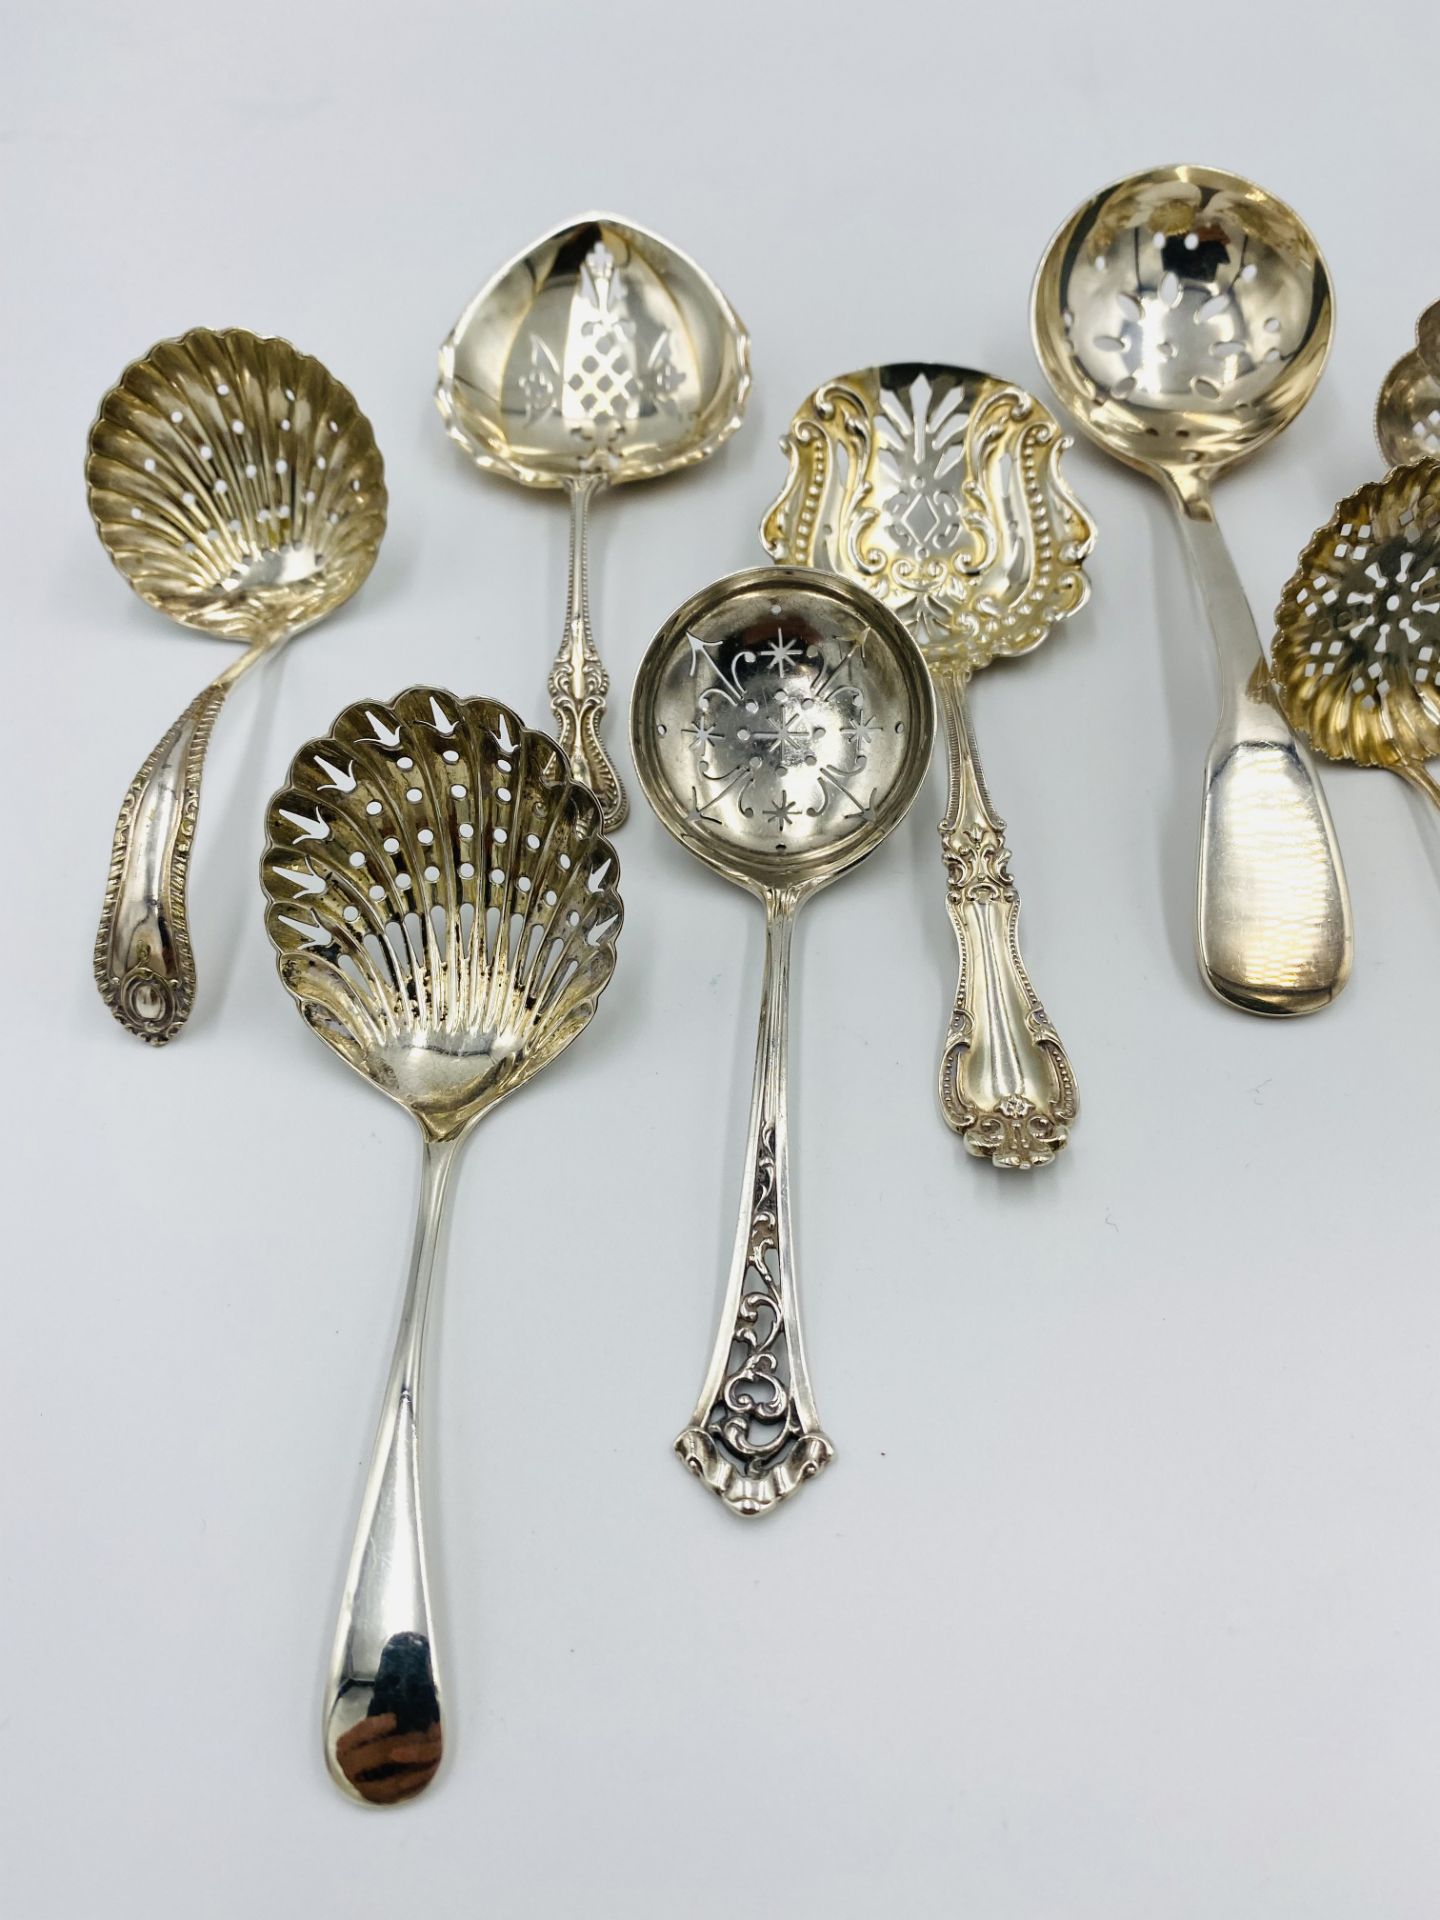 A collection of silver sugar sifters and a silver plated sugar sifter - Image 3 of 4